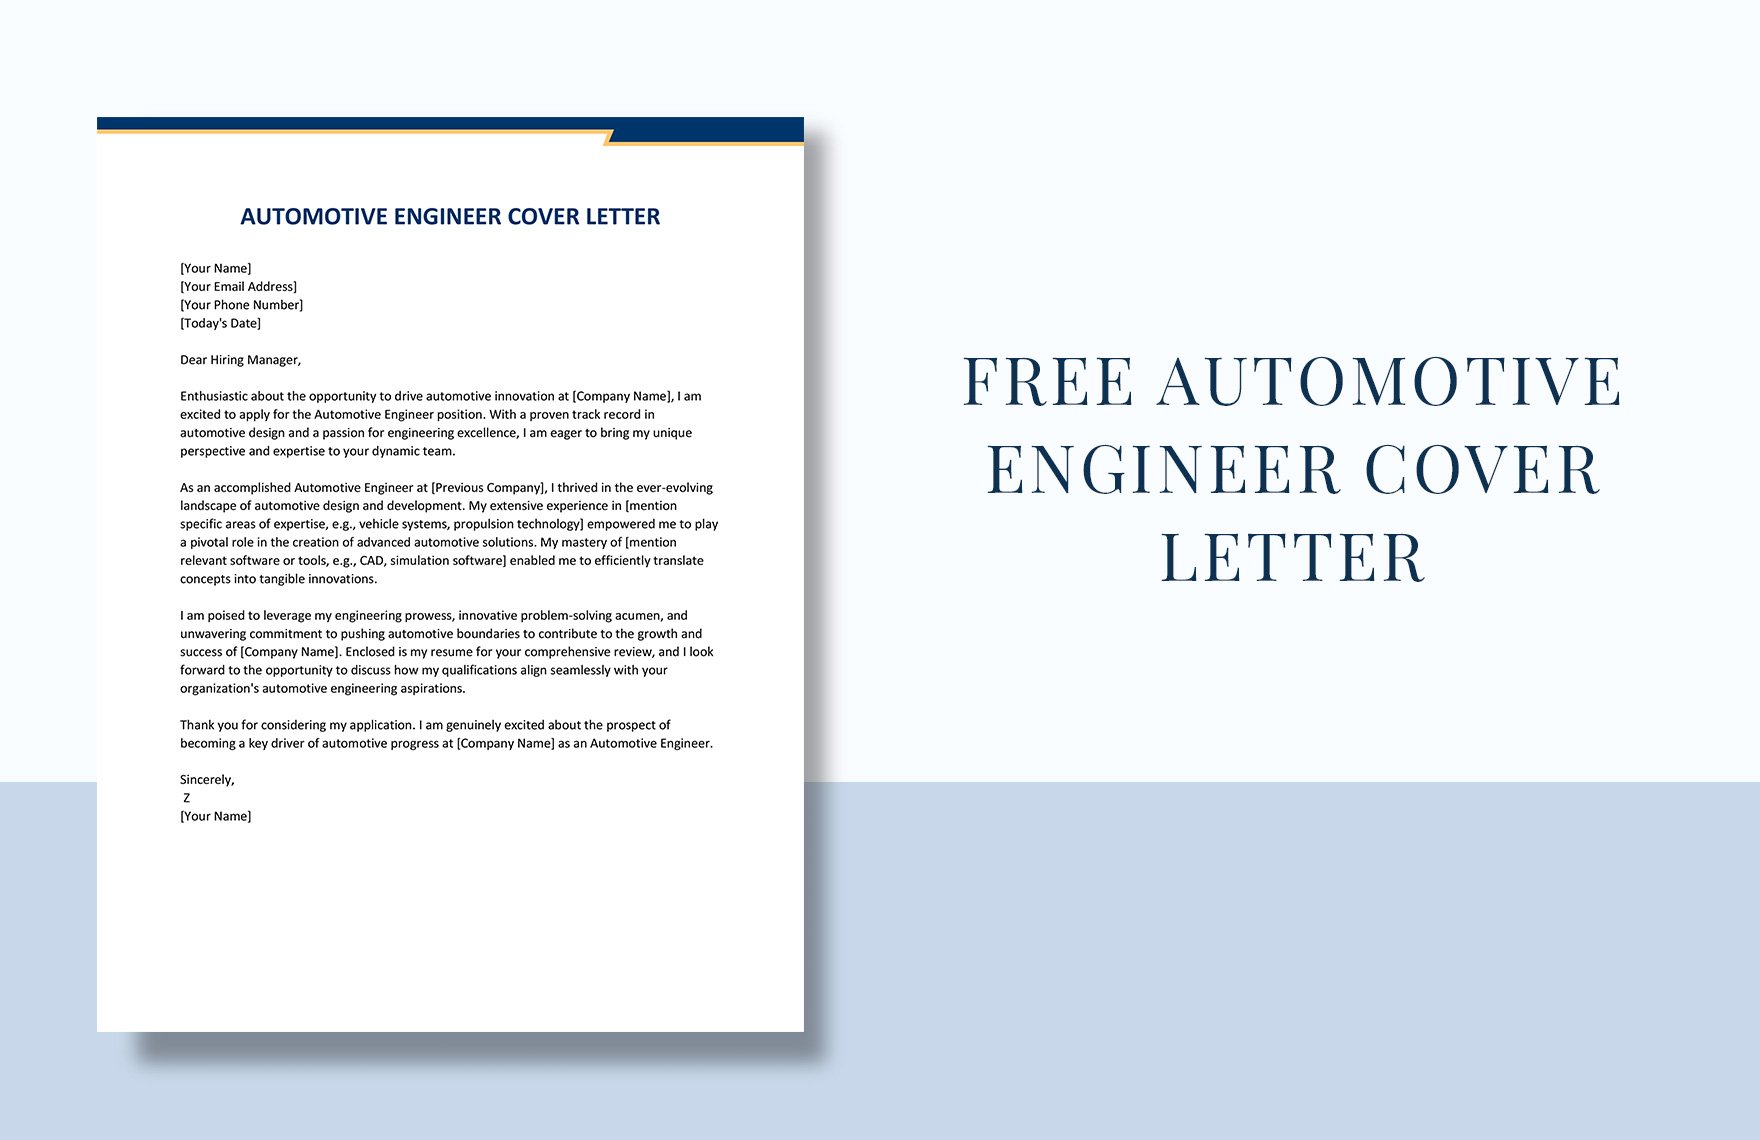 Automotive Engineer Cover Letter in Word, Google Docs